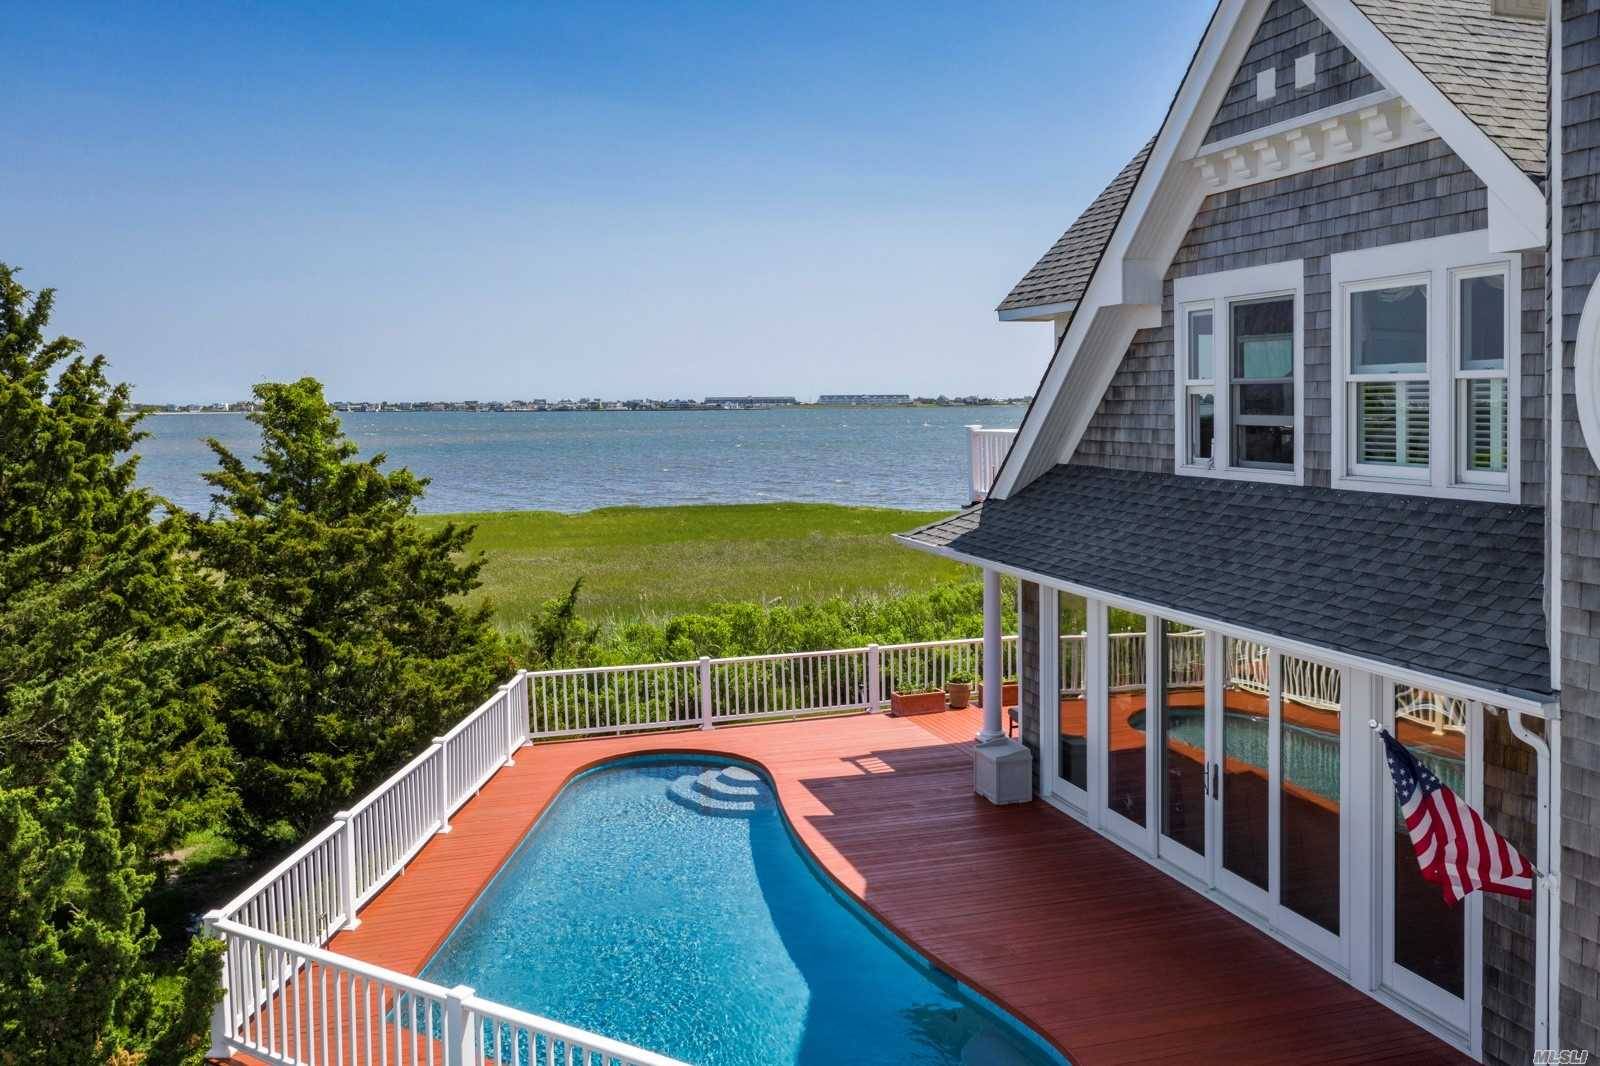 On 4 waterfront acres and 292 ft of frontage on Moriches Bay, this 4 bedroom, 4.